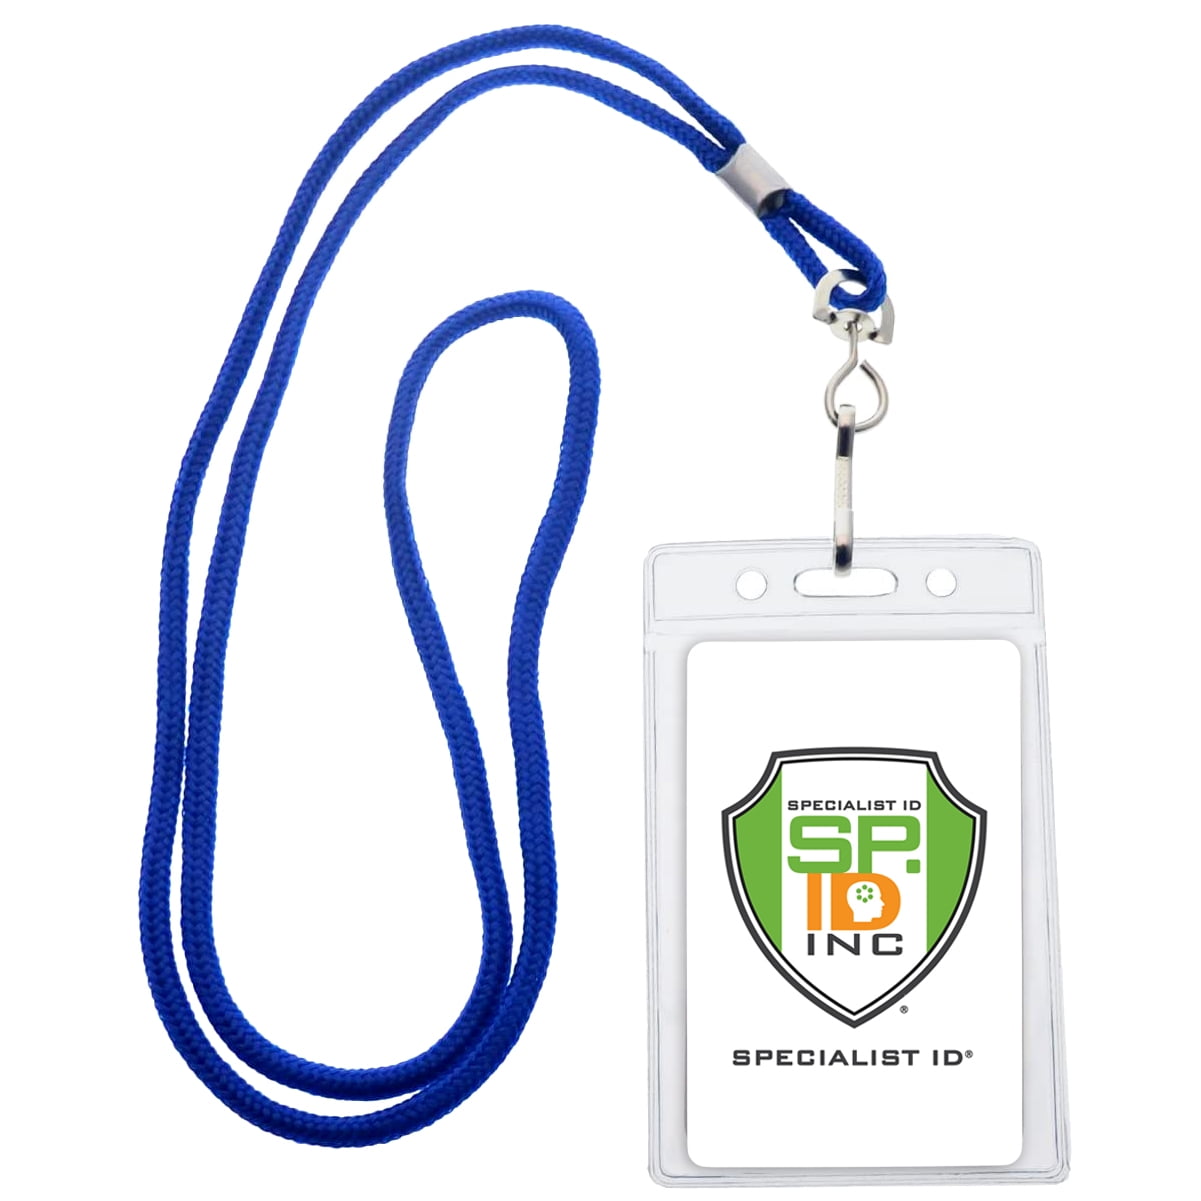 Blue Summit Supplies 12 Assorted Colors Lanyard with ID Holder, Lanyards for ID Badges, Vertical Lanyard Badge Holder with Lanyard for Teachers, Offic